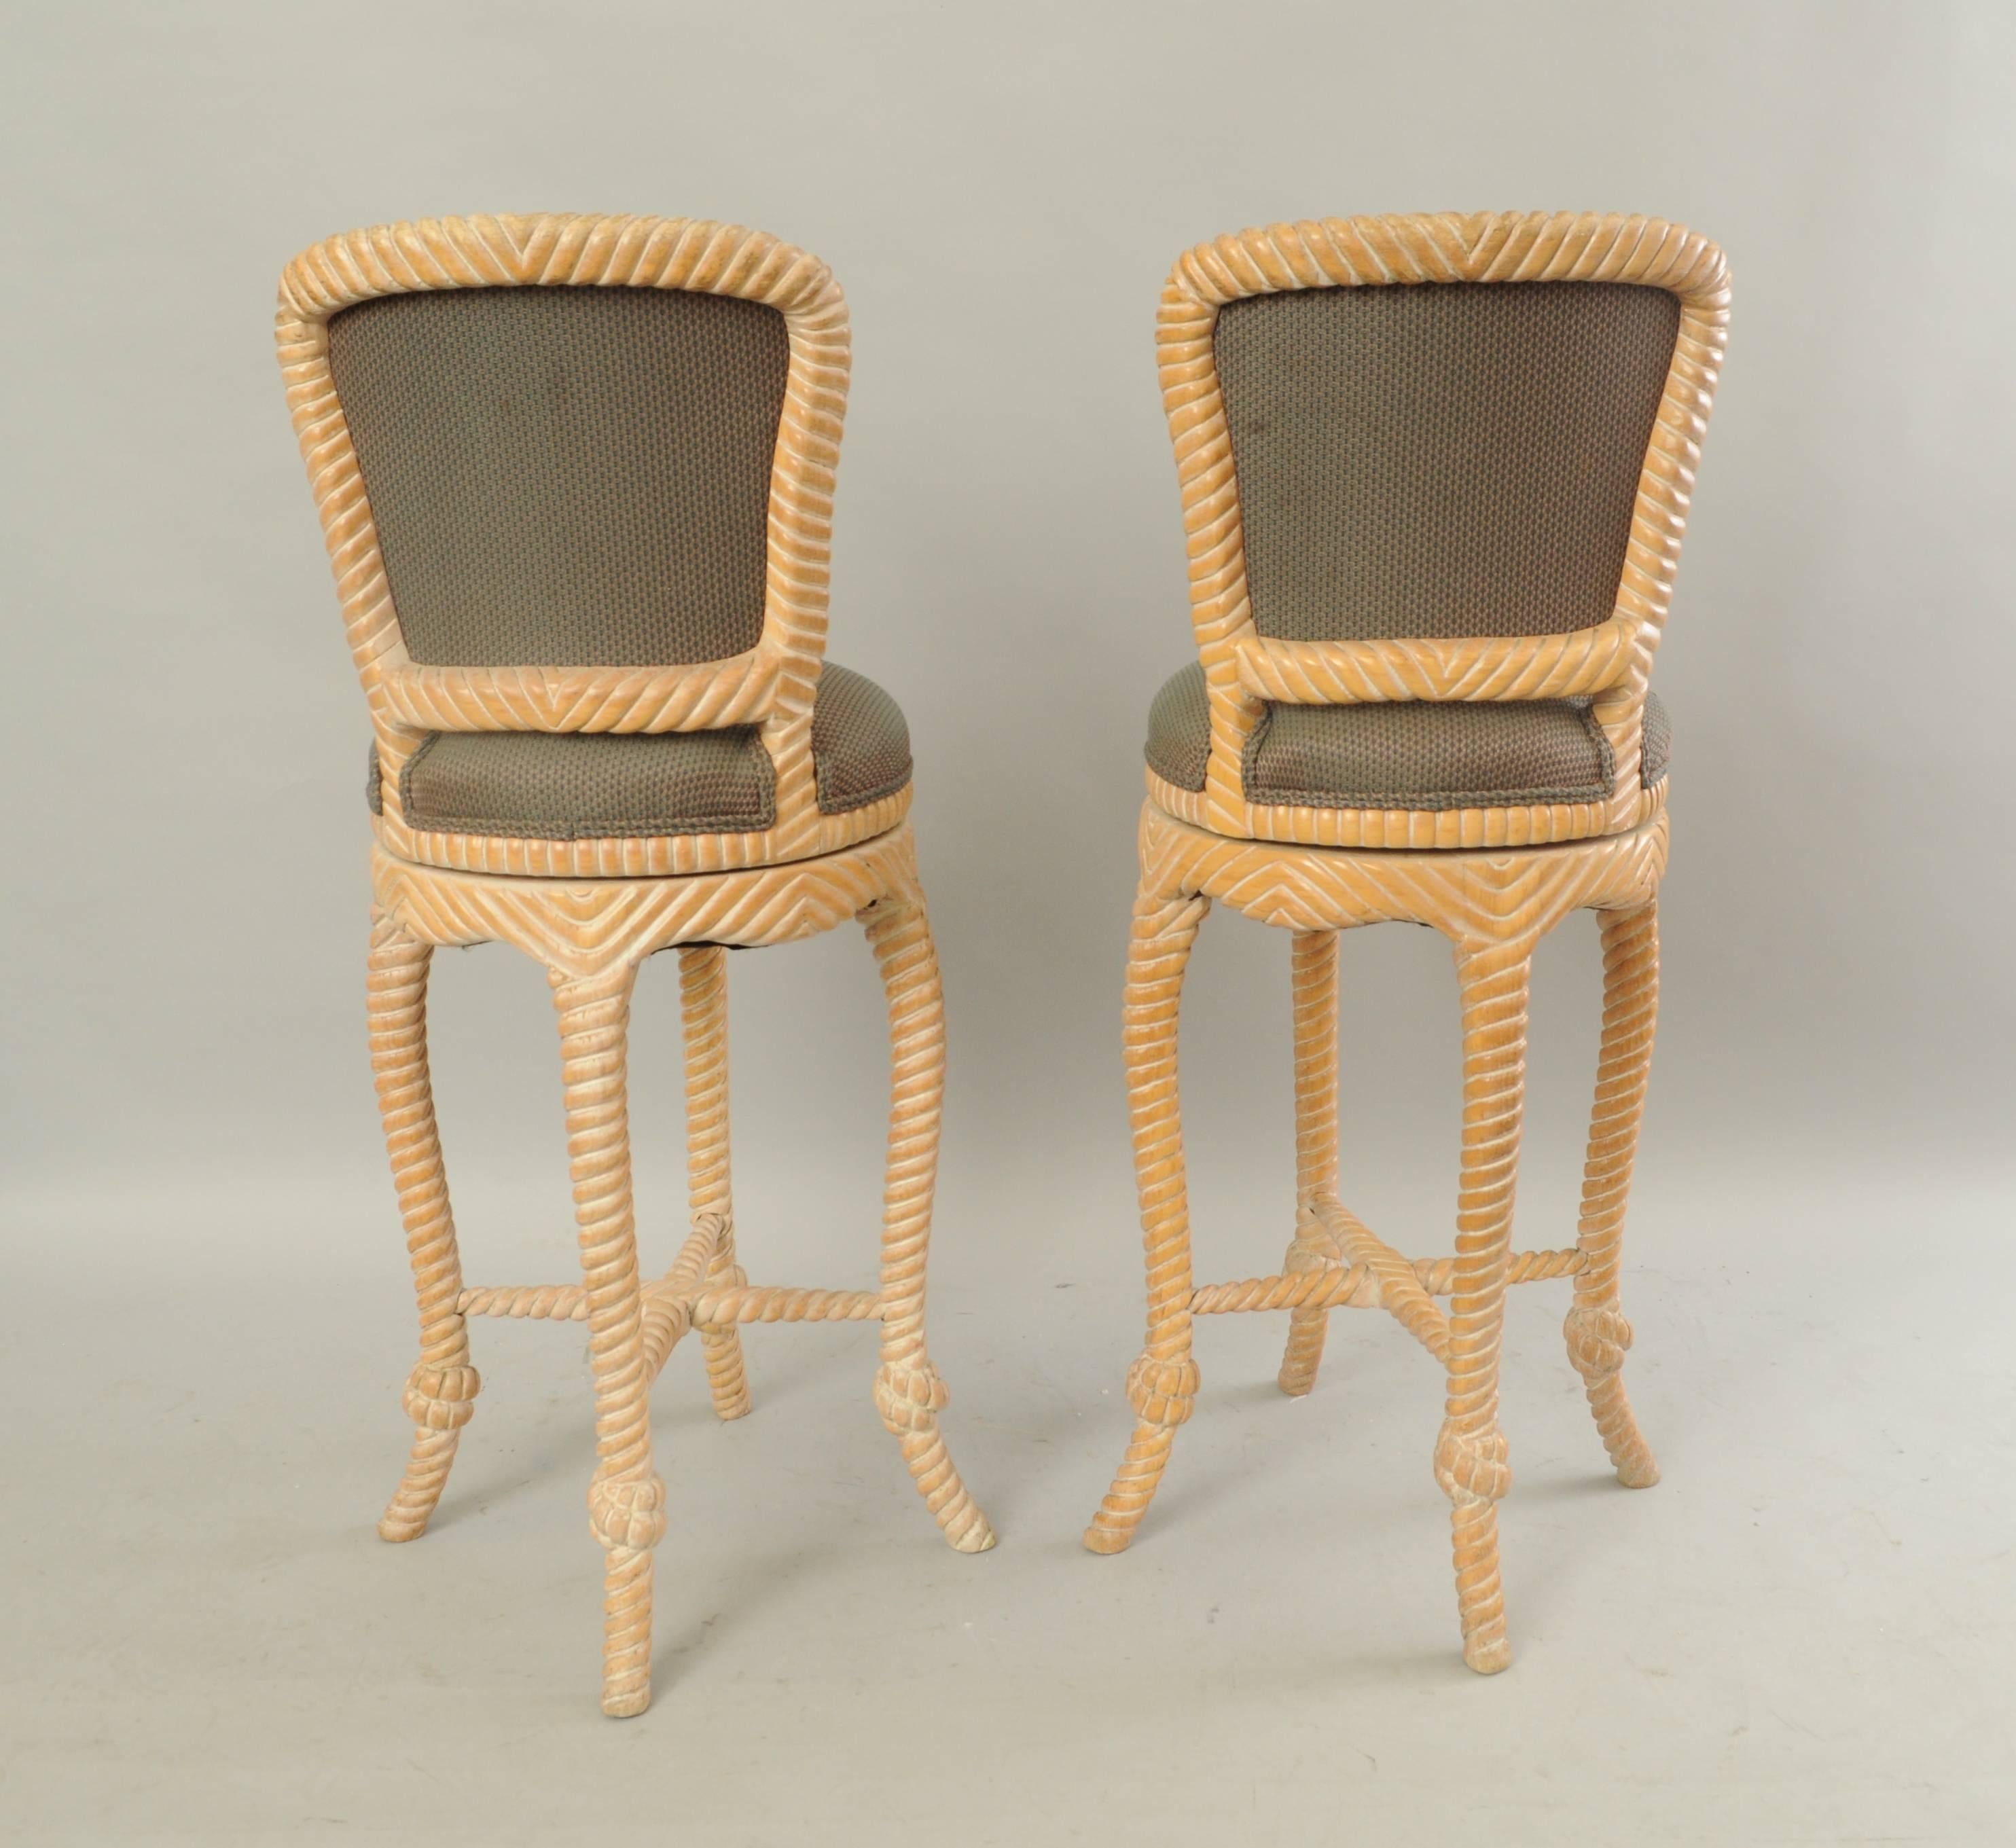 Pair of Vintage Italian Carved Wood Rope and Tassel Swivel Bar Stools Chairs In Good Condition For Sale In Philadelphia, PA